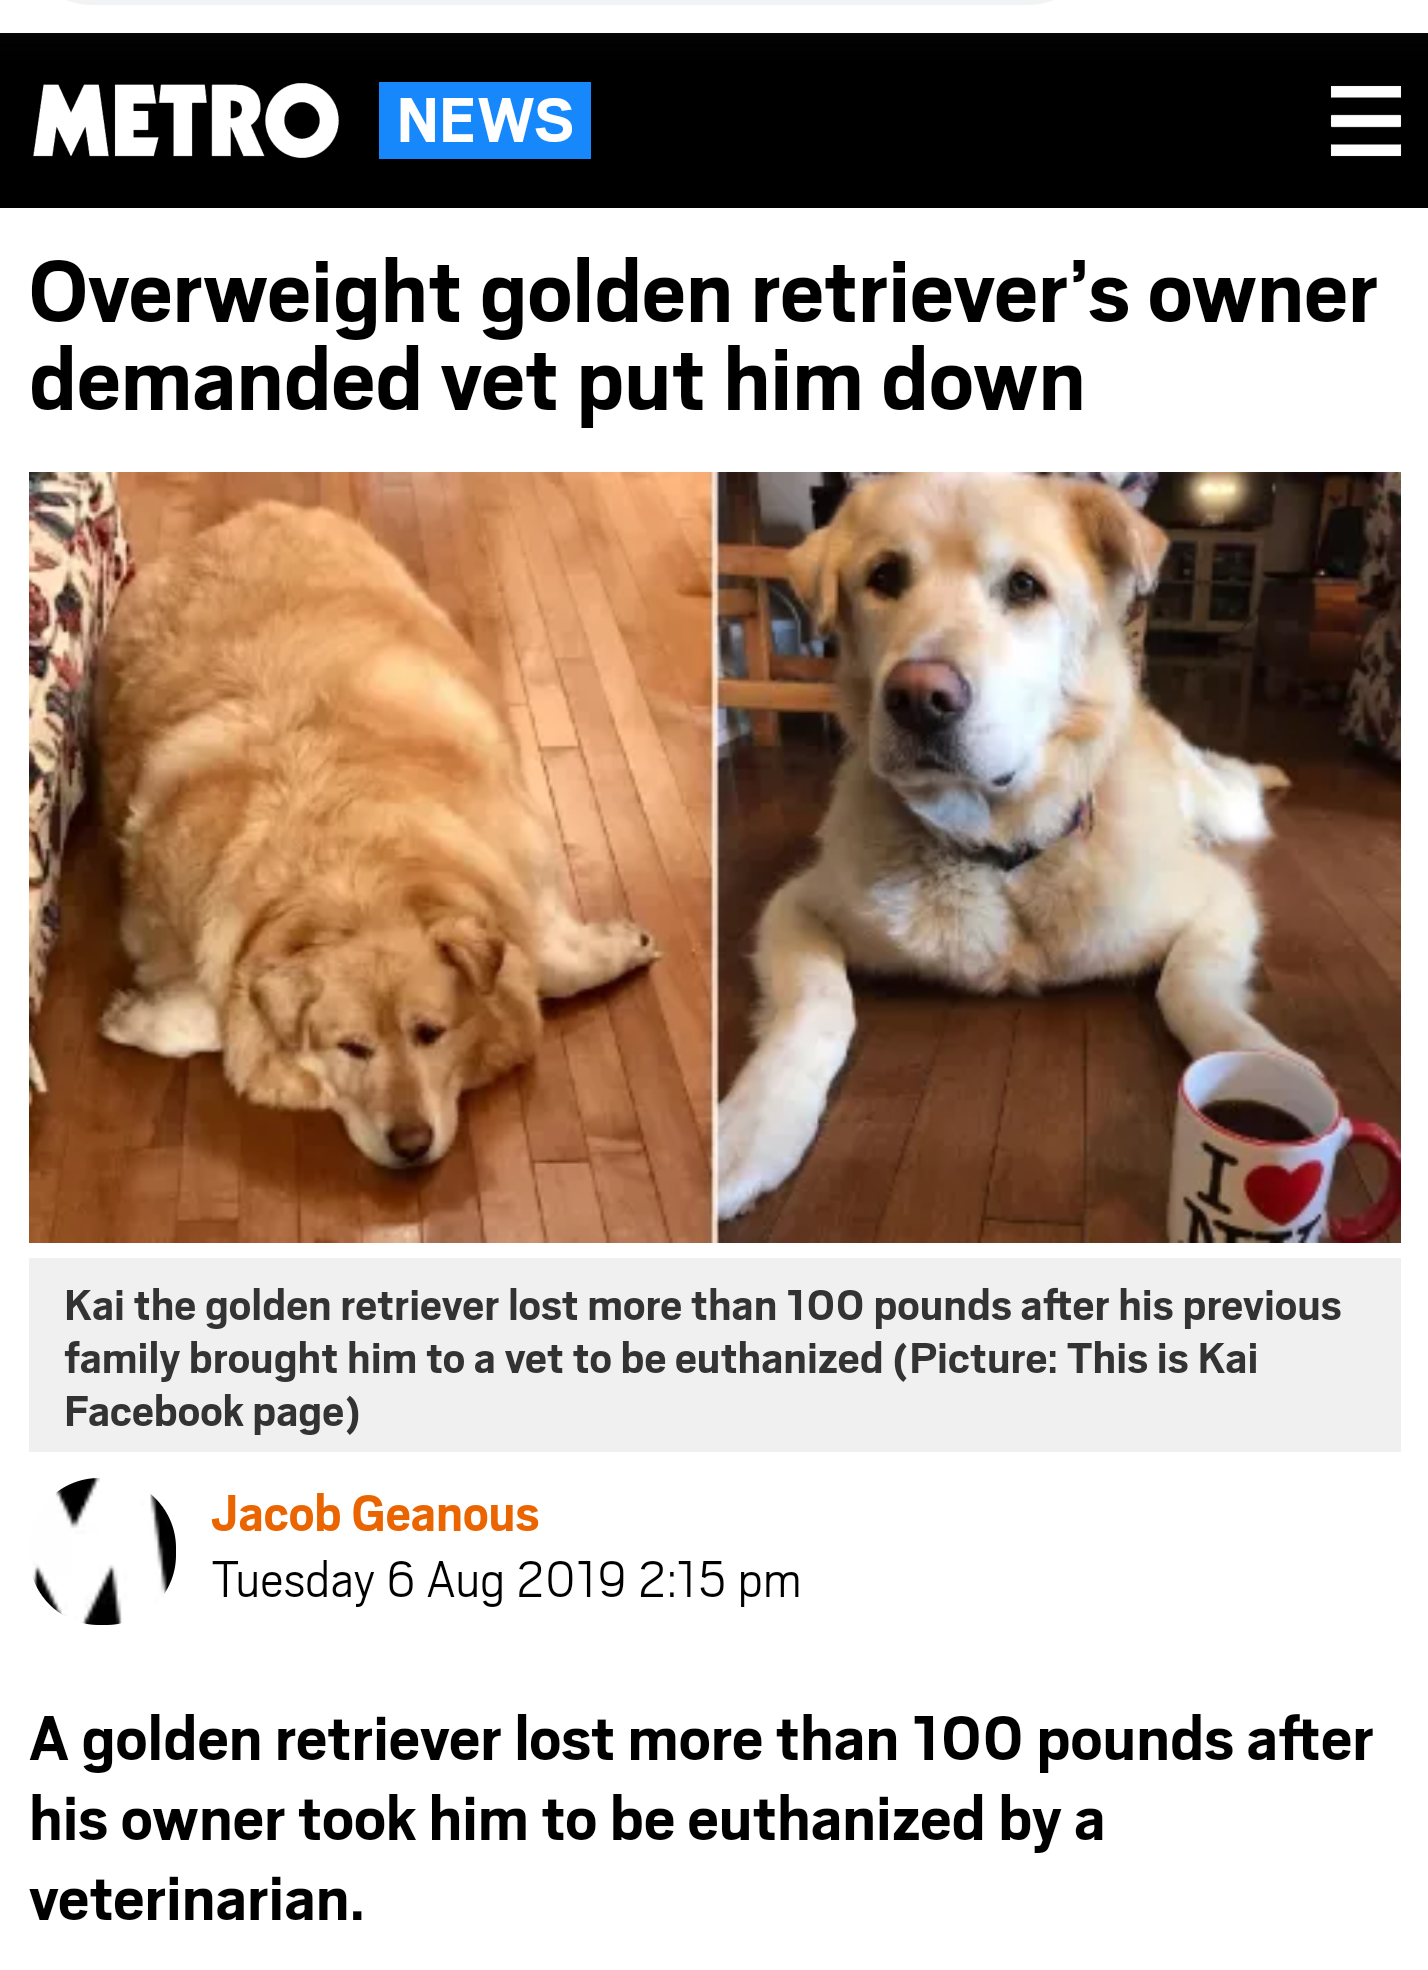 photo caption - Metro News Overweight golden retriever's owner demanded vet put him down Kai the golden retriever lost more than 100 pounds after his previous family brought him to a vet to be euthanized